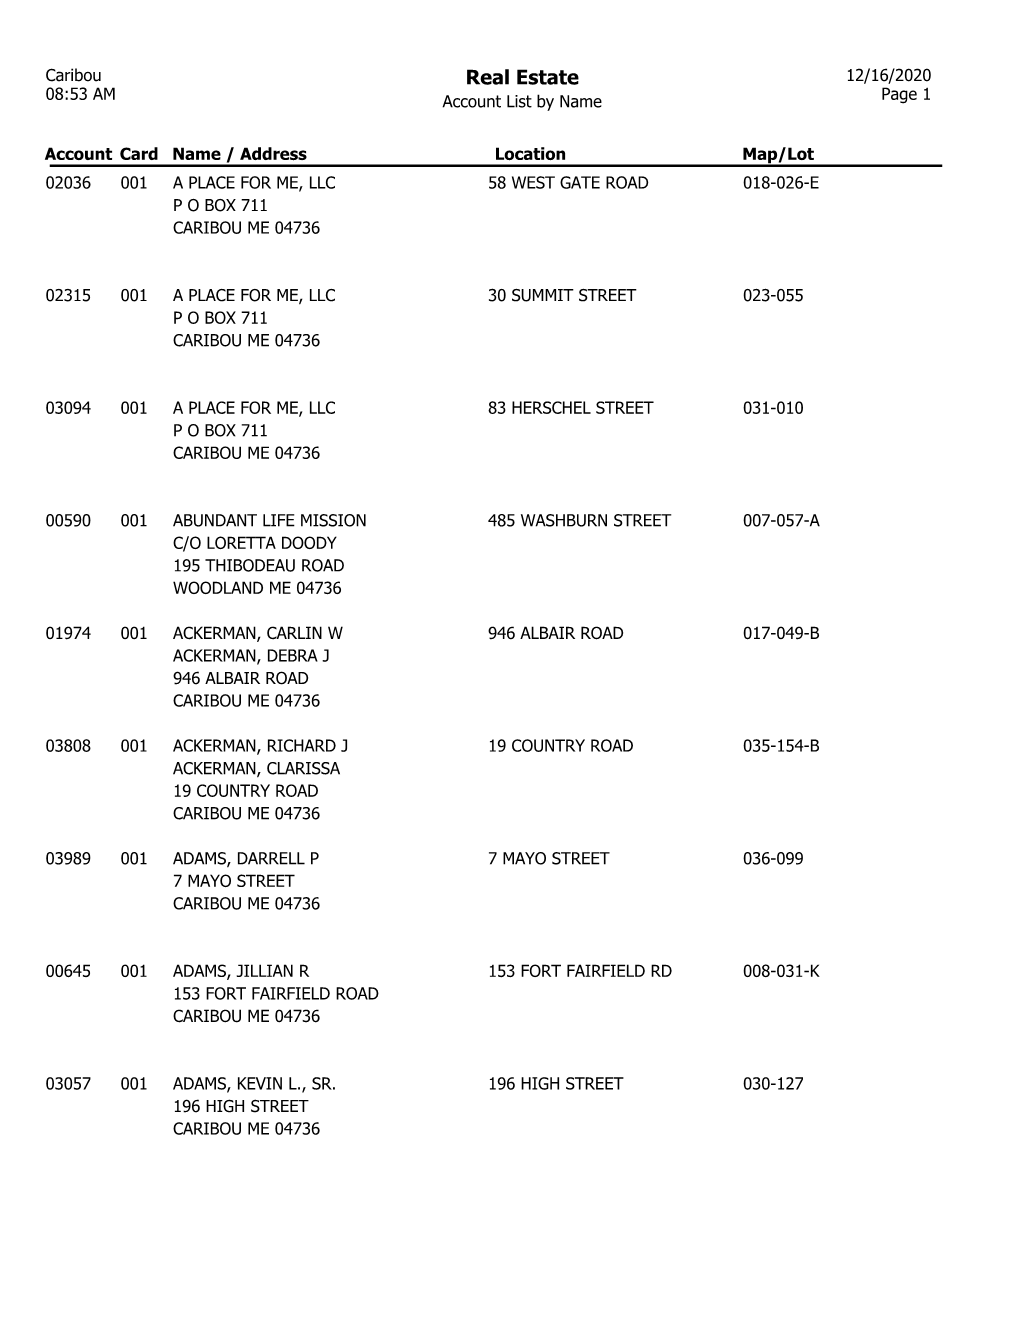 Real Estate 12/16/2020 08:53 AM Account List by Name Page 1